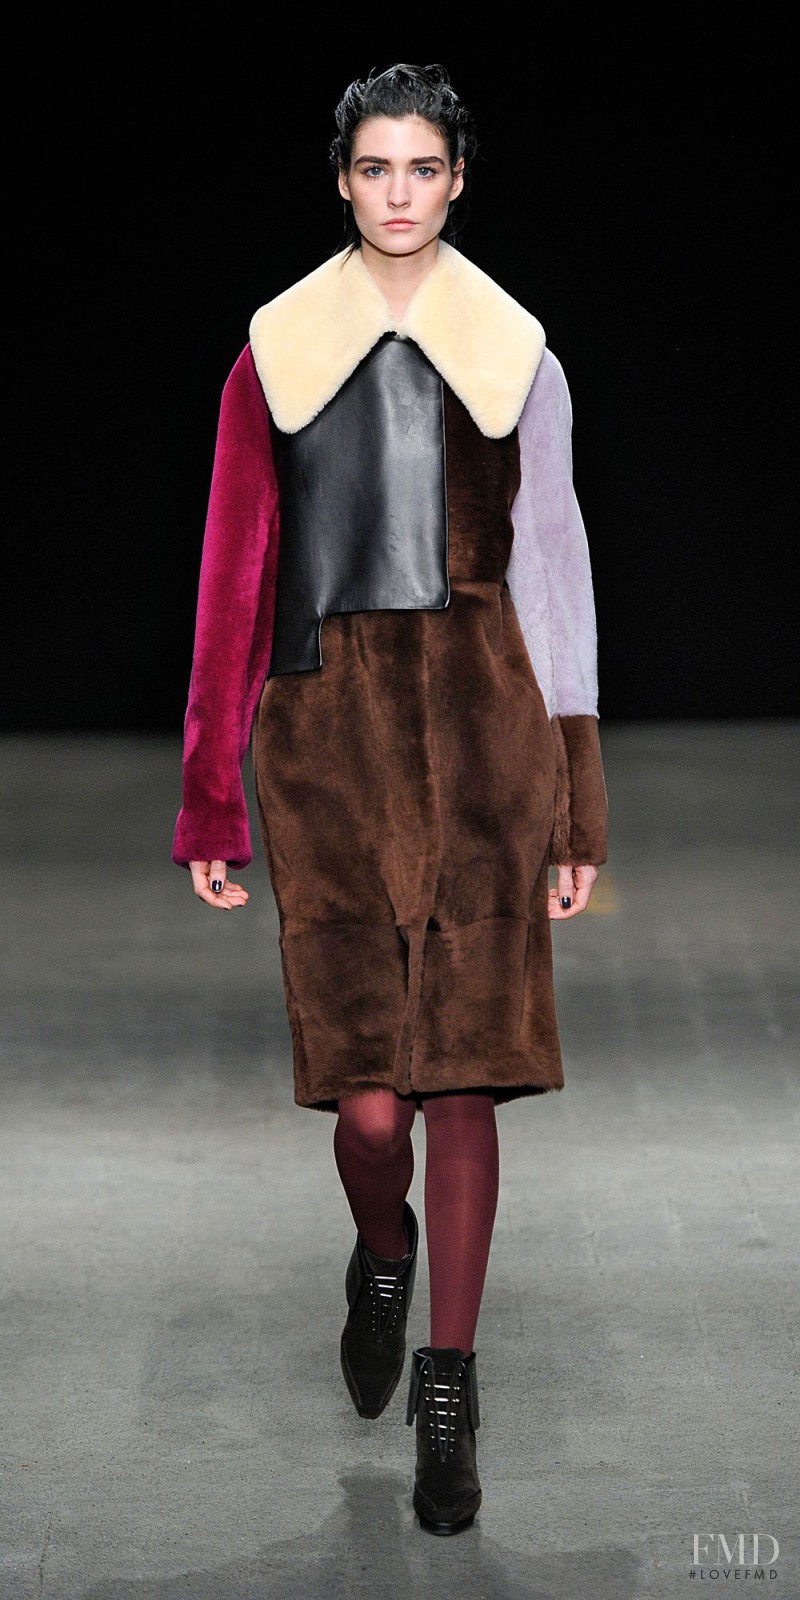 Manon Leloup featured in  the 3.1 Phillip Lim fashion show for Autumn/Winter 2014